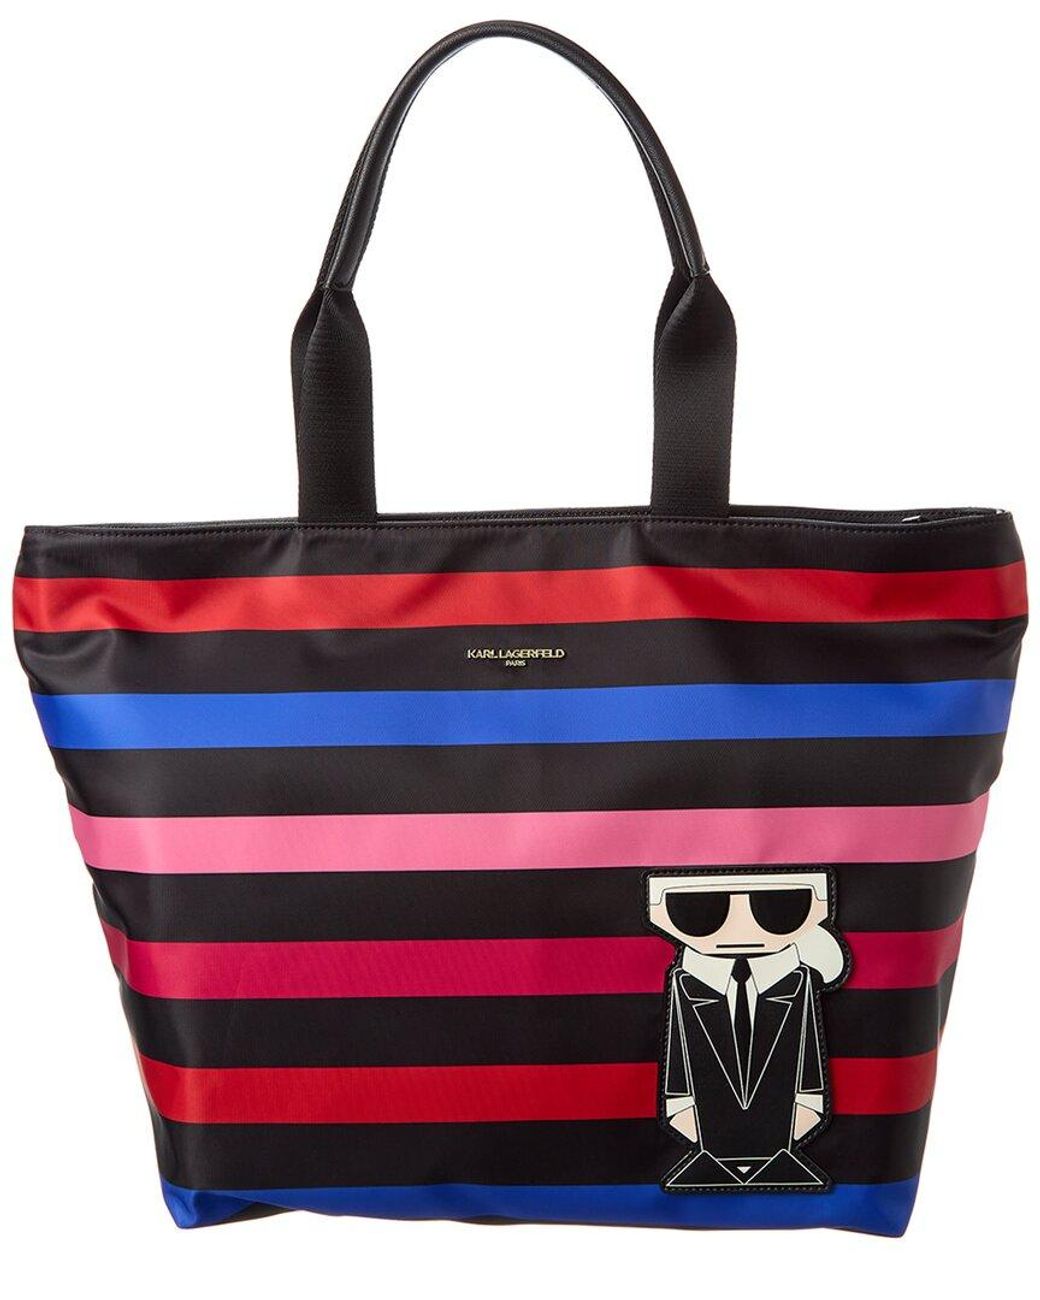 Karl Lagerfeld Amour Tote in Black | Lyst